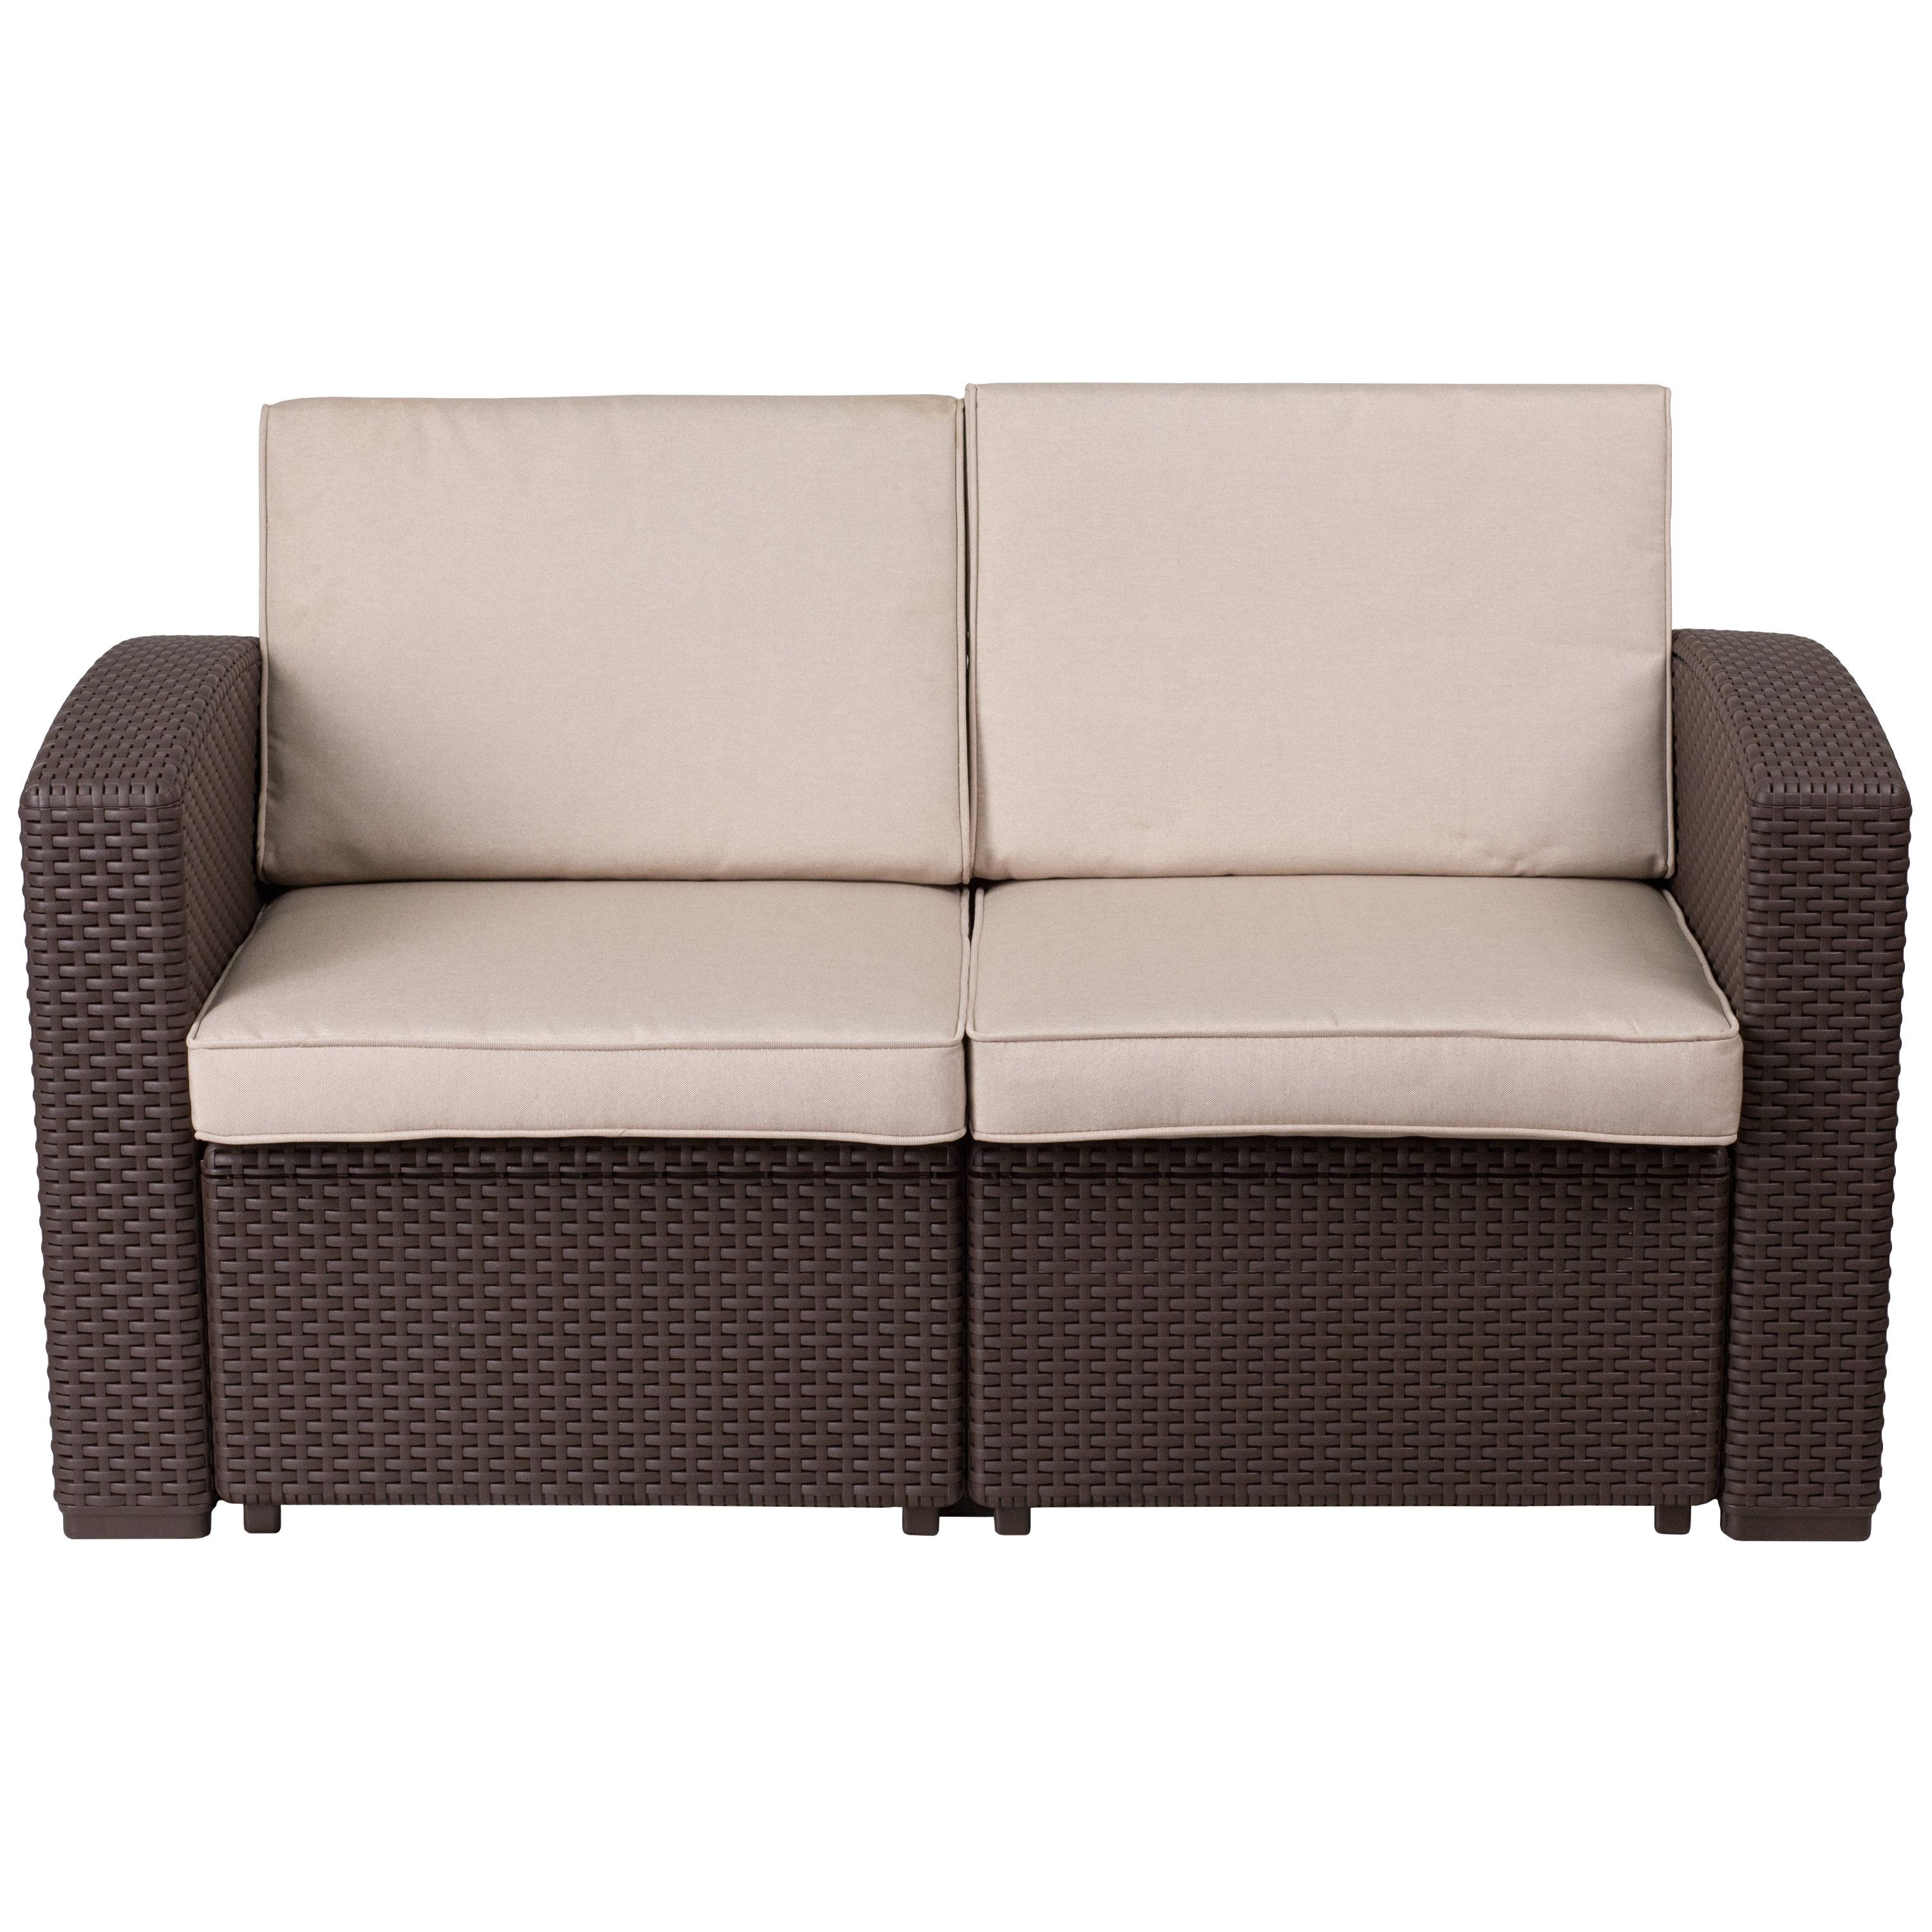 Wayfair In 2019 Kunz Loveseats With Cushions (View 3 of 20)